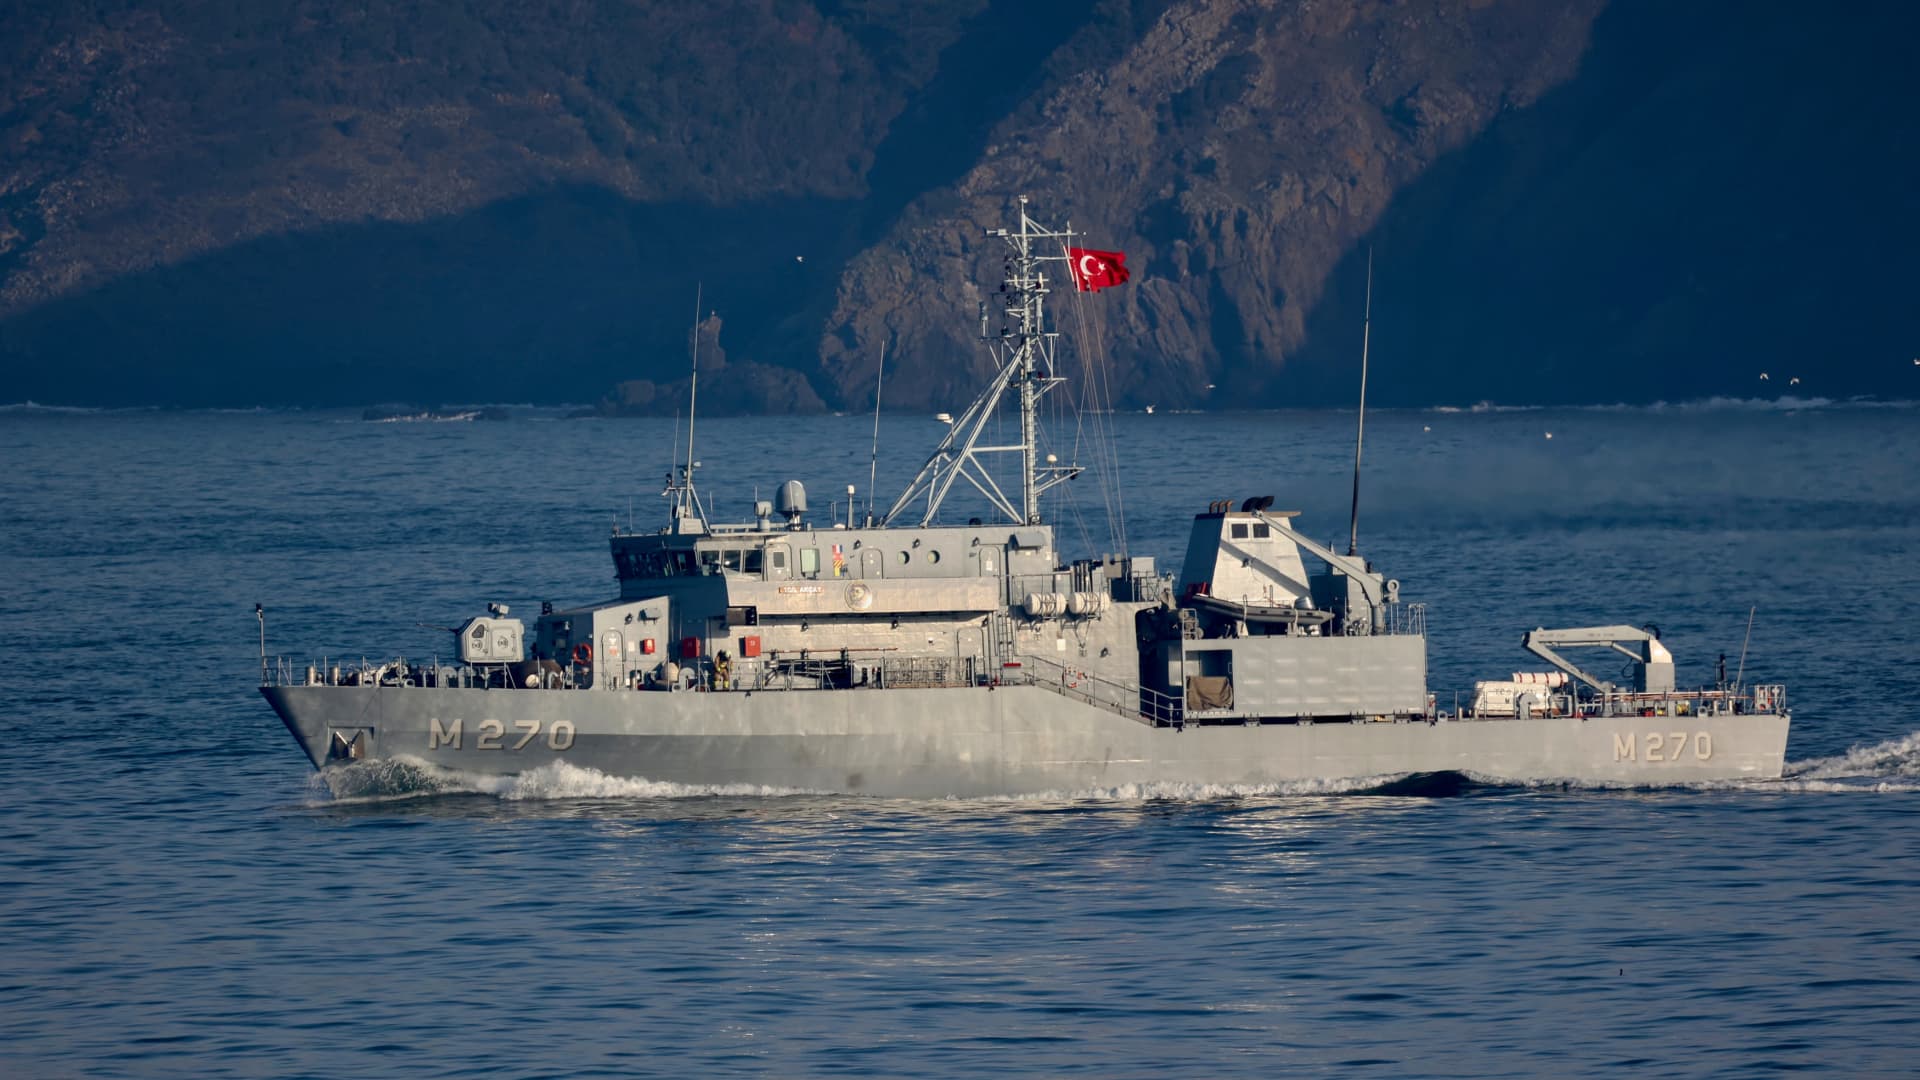 Turkish Navy's Aydin class mine hunting vessel TCG Akcay sails in the Bosphorus on its way to the Black Sea in Istanbul, Turkey March 26, 2022.